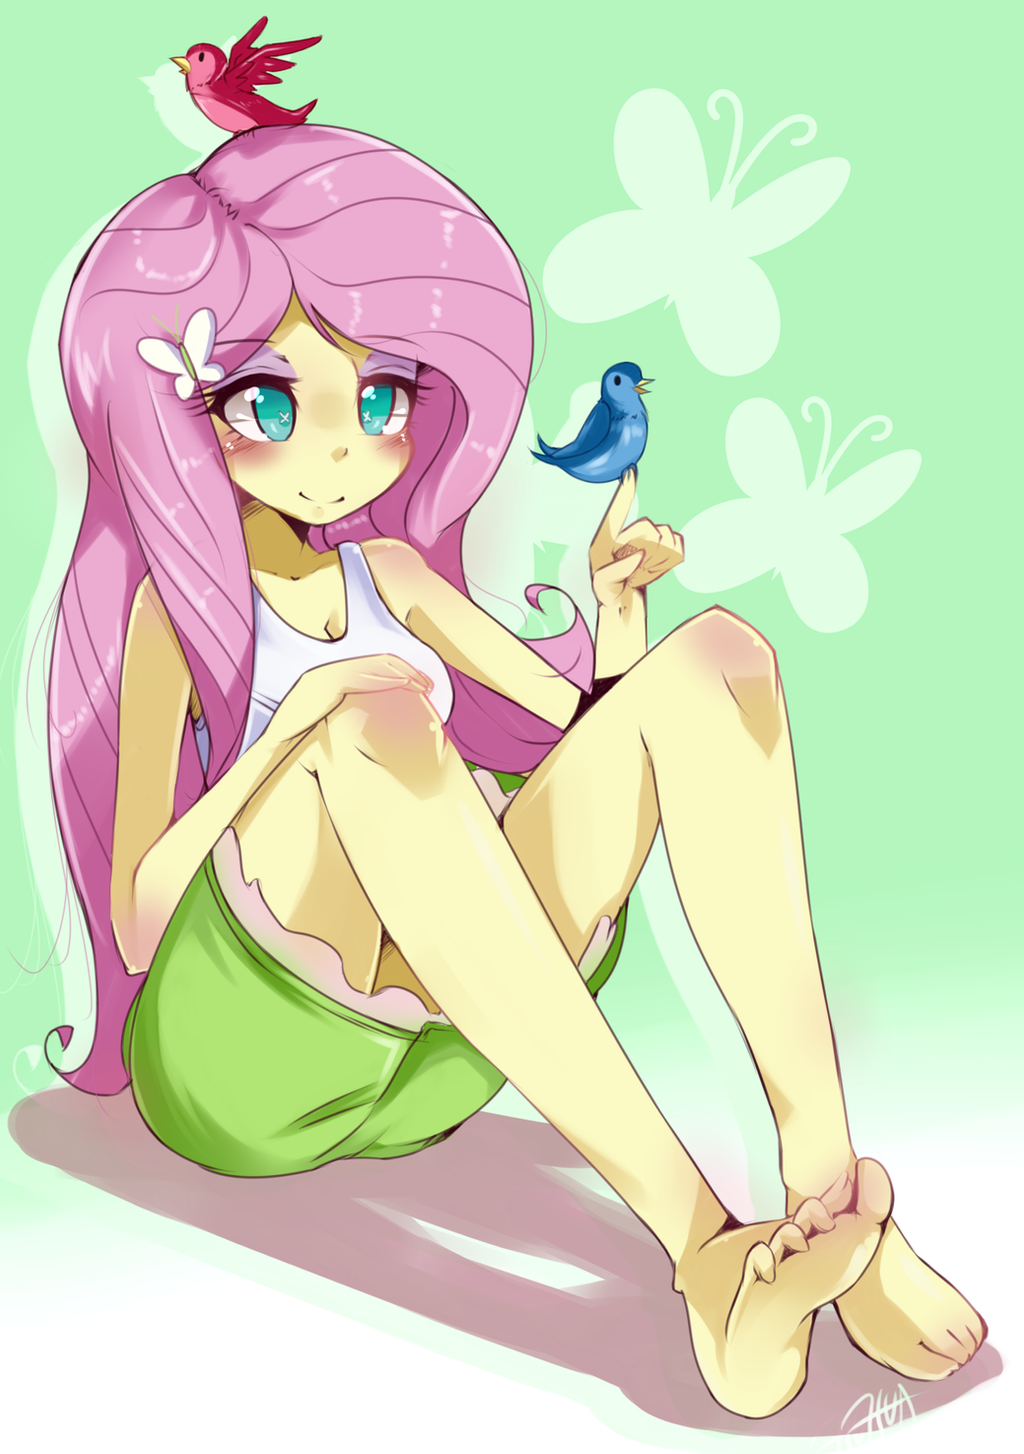 fluttershy_by_hua113-d6ufuj4.png